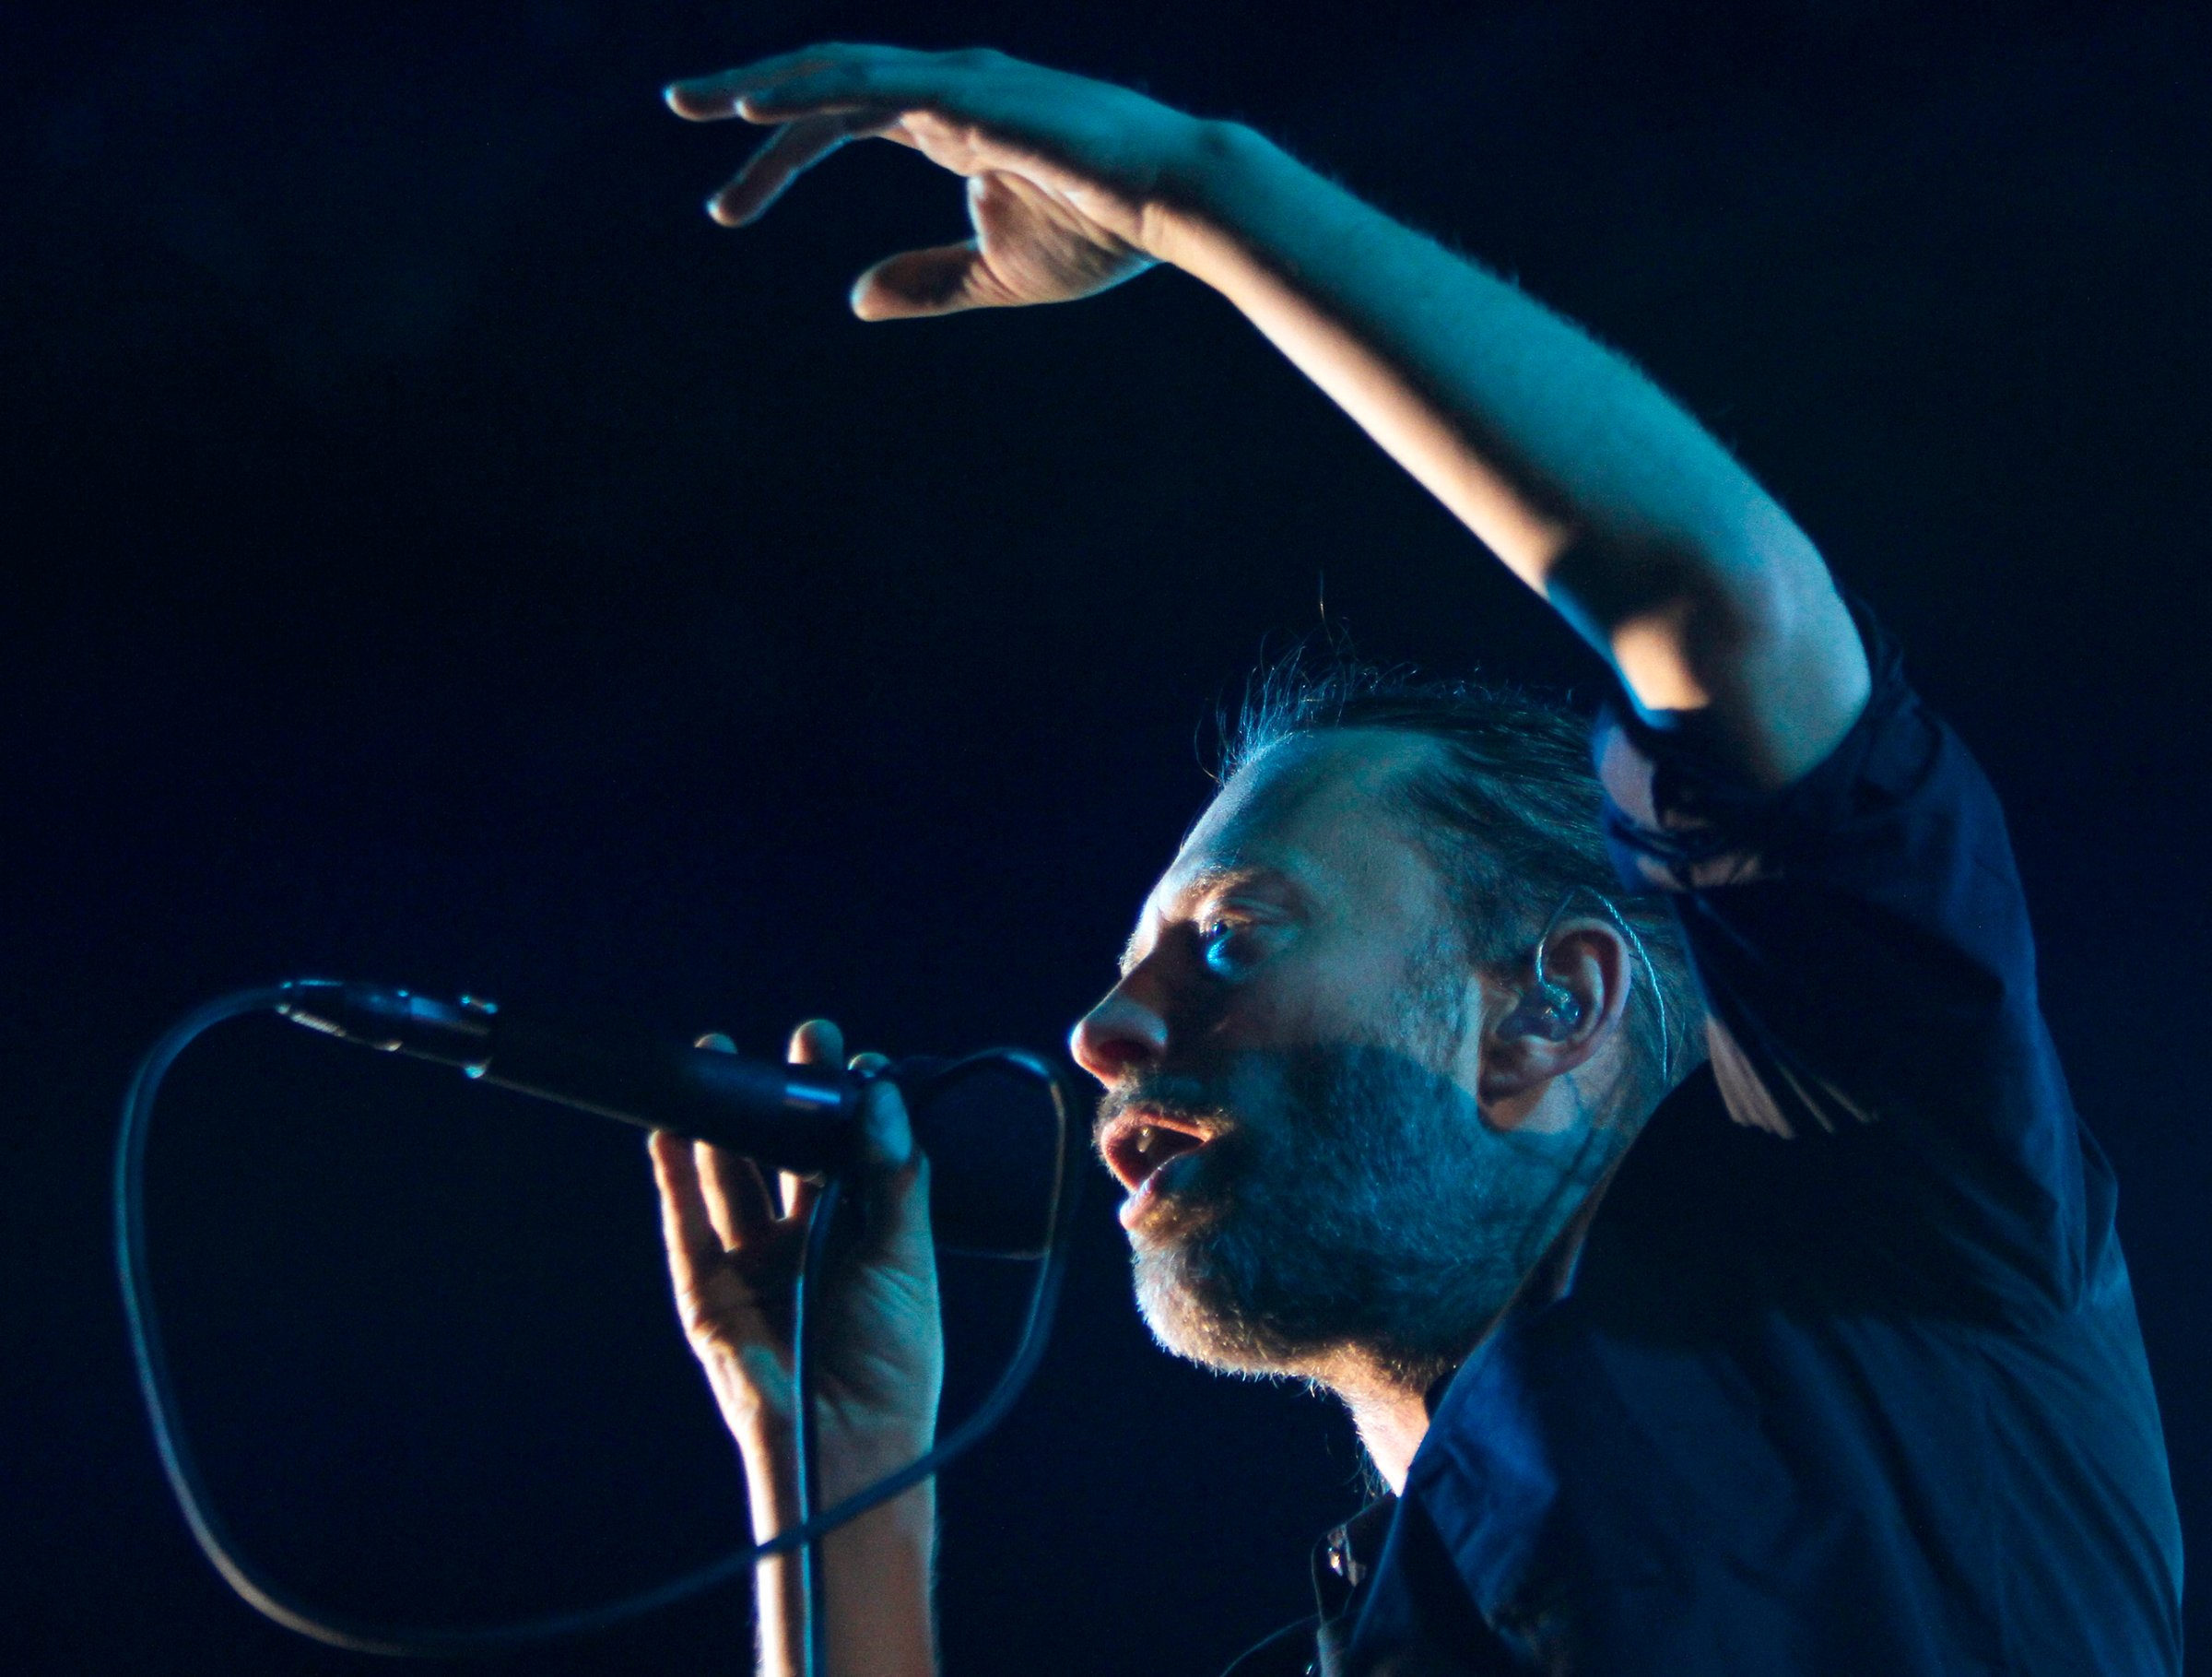 Thom Yorke of British band Radiohead performs at the Optimus Alive Festival in Alges, on the outskirts of Lisbon July 15, 2012.